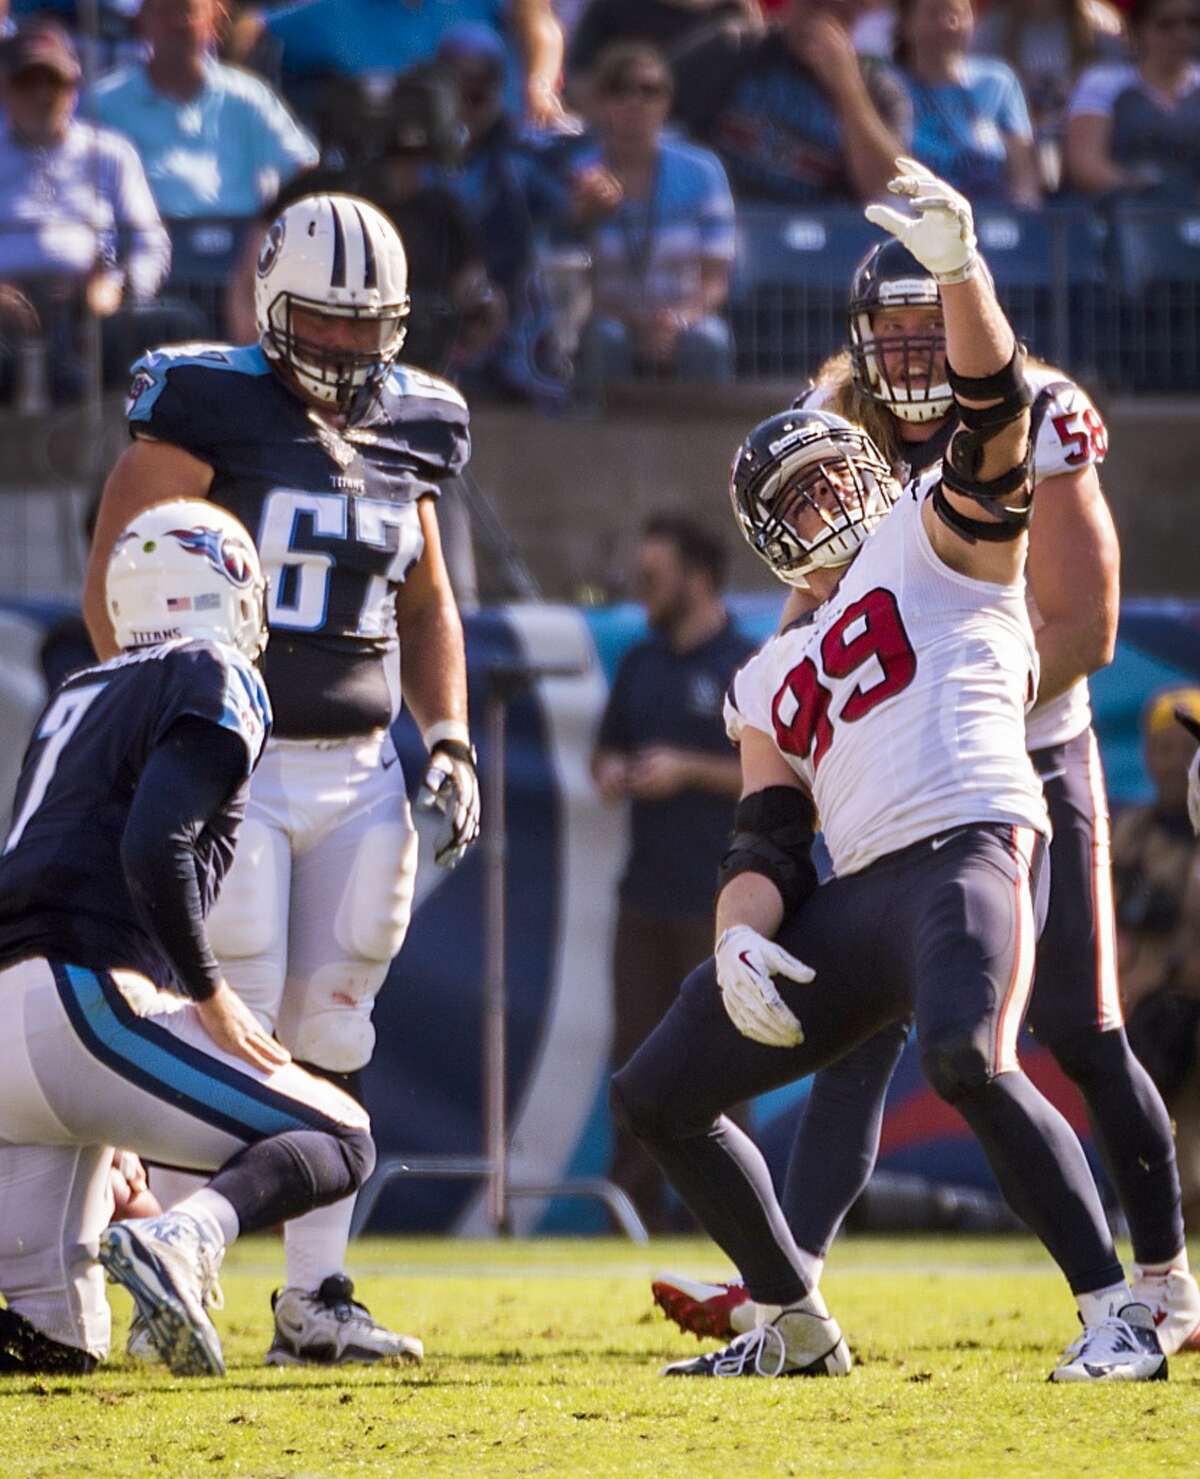 J.J. Watt vs. Zach Mettenberger A rookie QB's game-day selfie launched a feud when Watt mocked Mettenberger with a selfie-taking sack celebration last October. He then remarked that "this is the NFL, not high school." Mettenberger took months to respond before referencing Watt wearing a Texans letterman jacket before a 2012 loss at New England and dubbing Watt's behavior "high schoolish." Never one to let something slide, Watt responded via Twitter, saying "a lion doesn't concern himself with the opinions of a sheep."